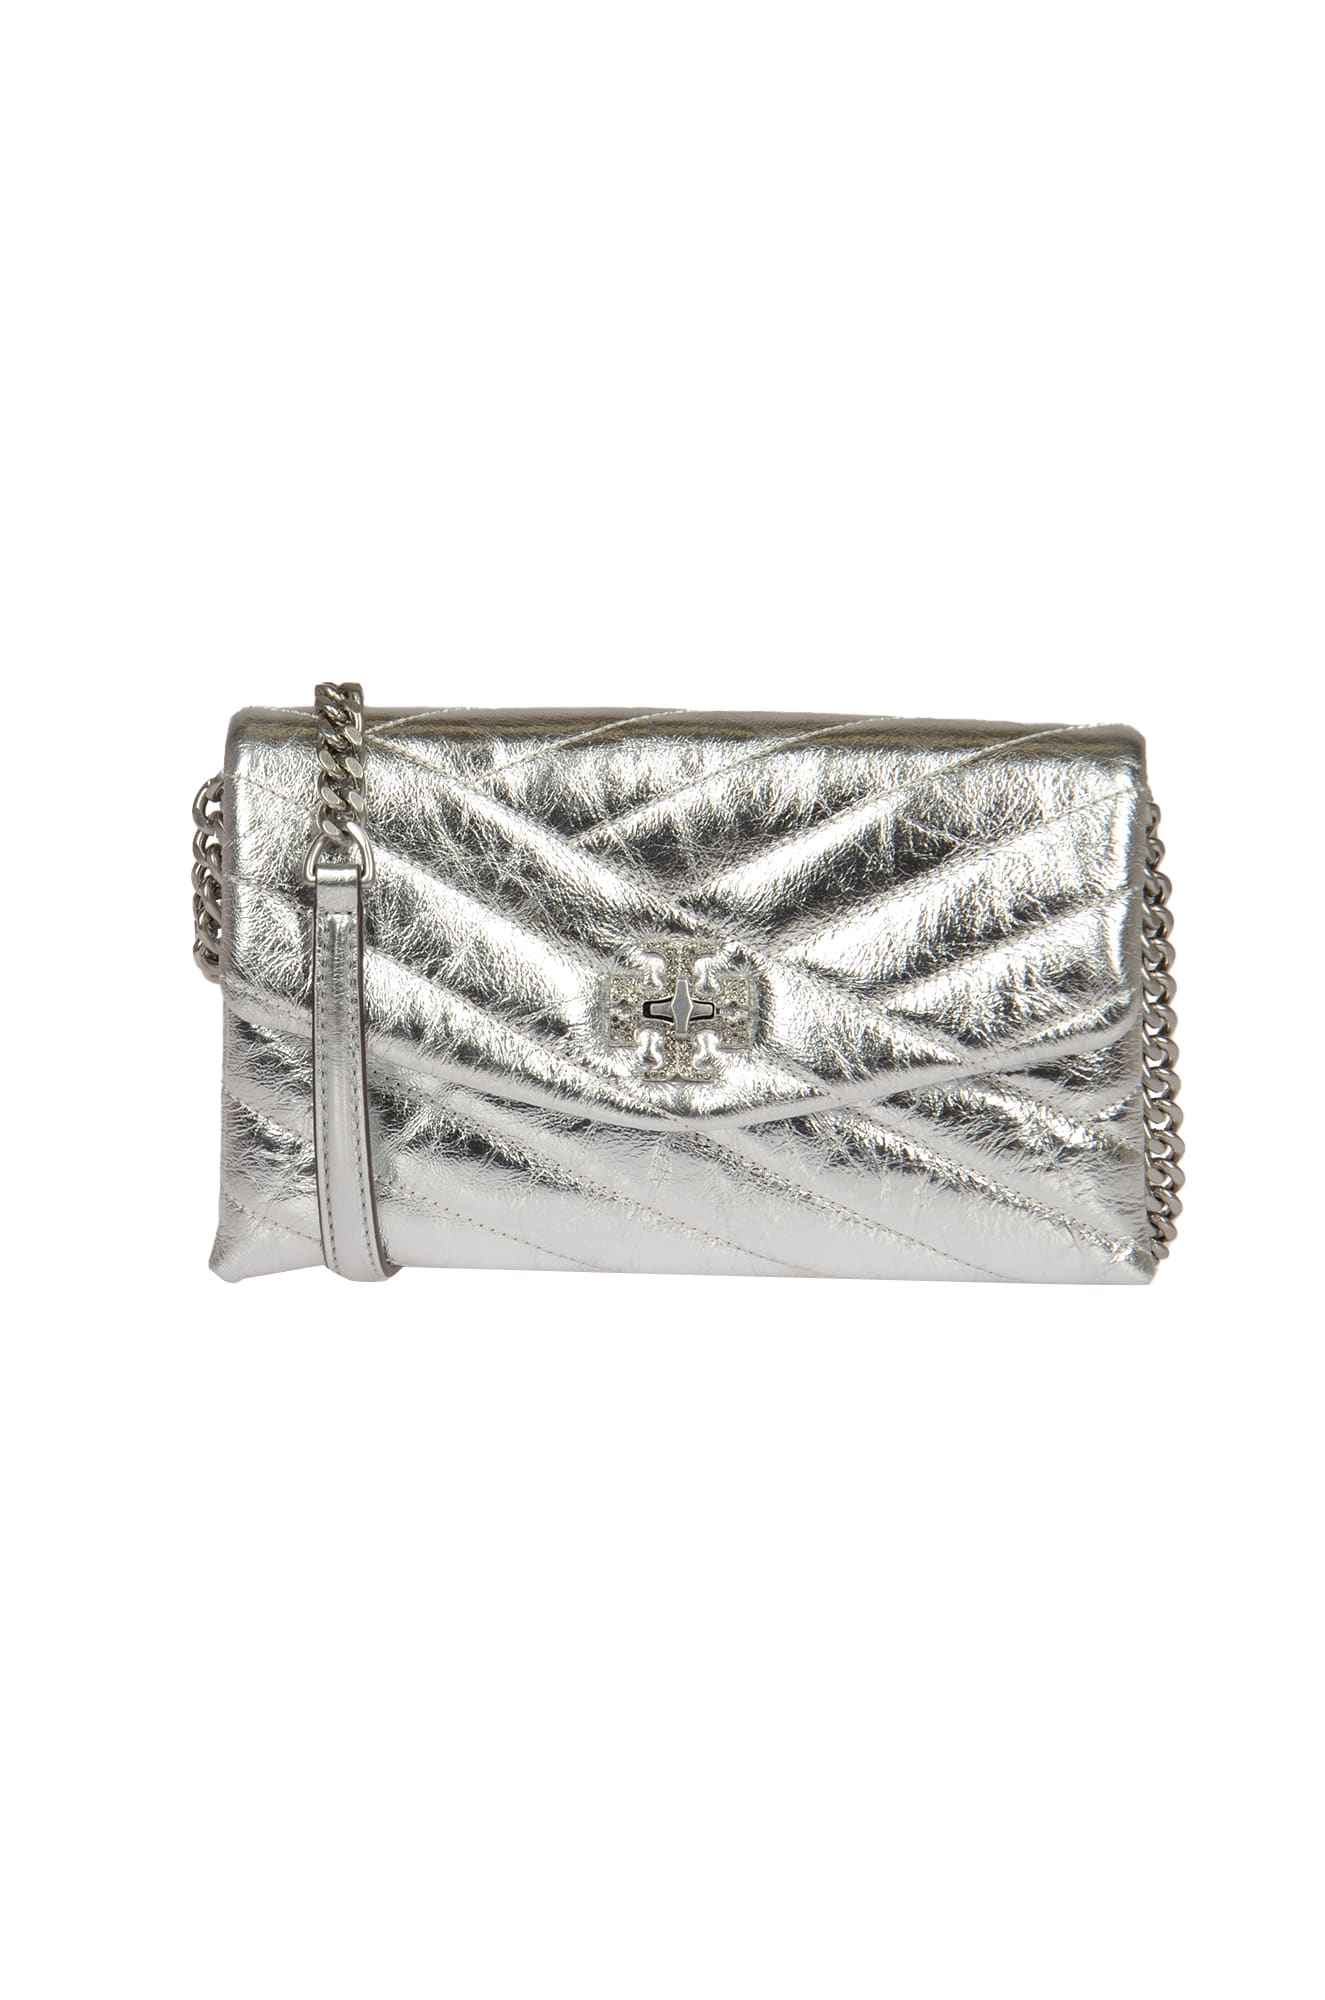 Tory Burch Chain Strap Shoulder Bag In Silver